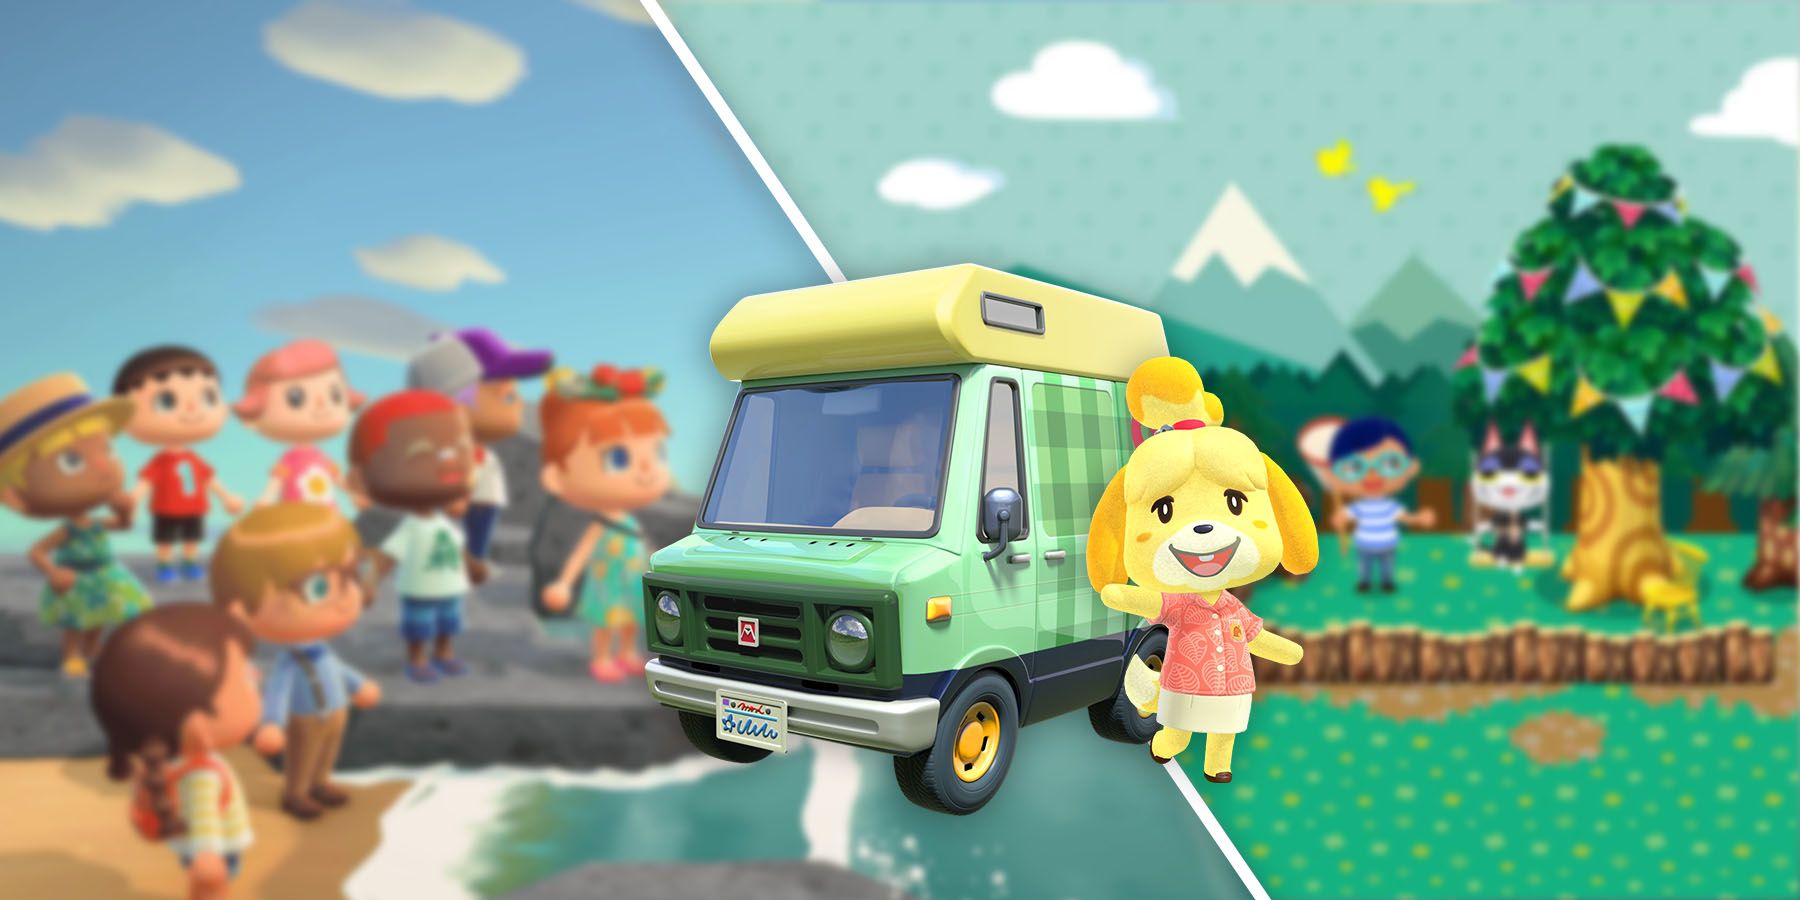 What's Next for Animal Crossing After New Horizons